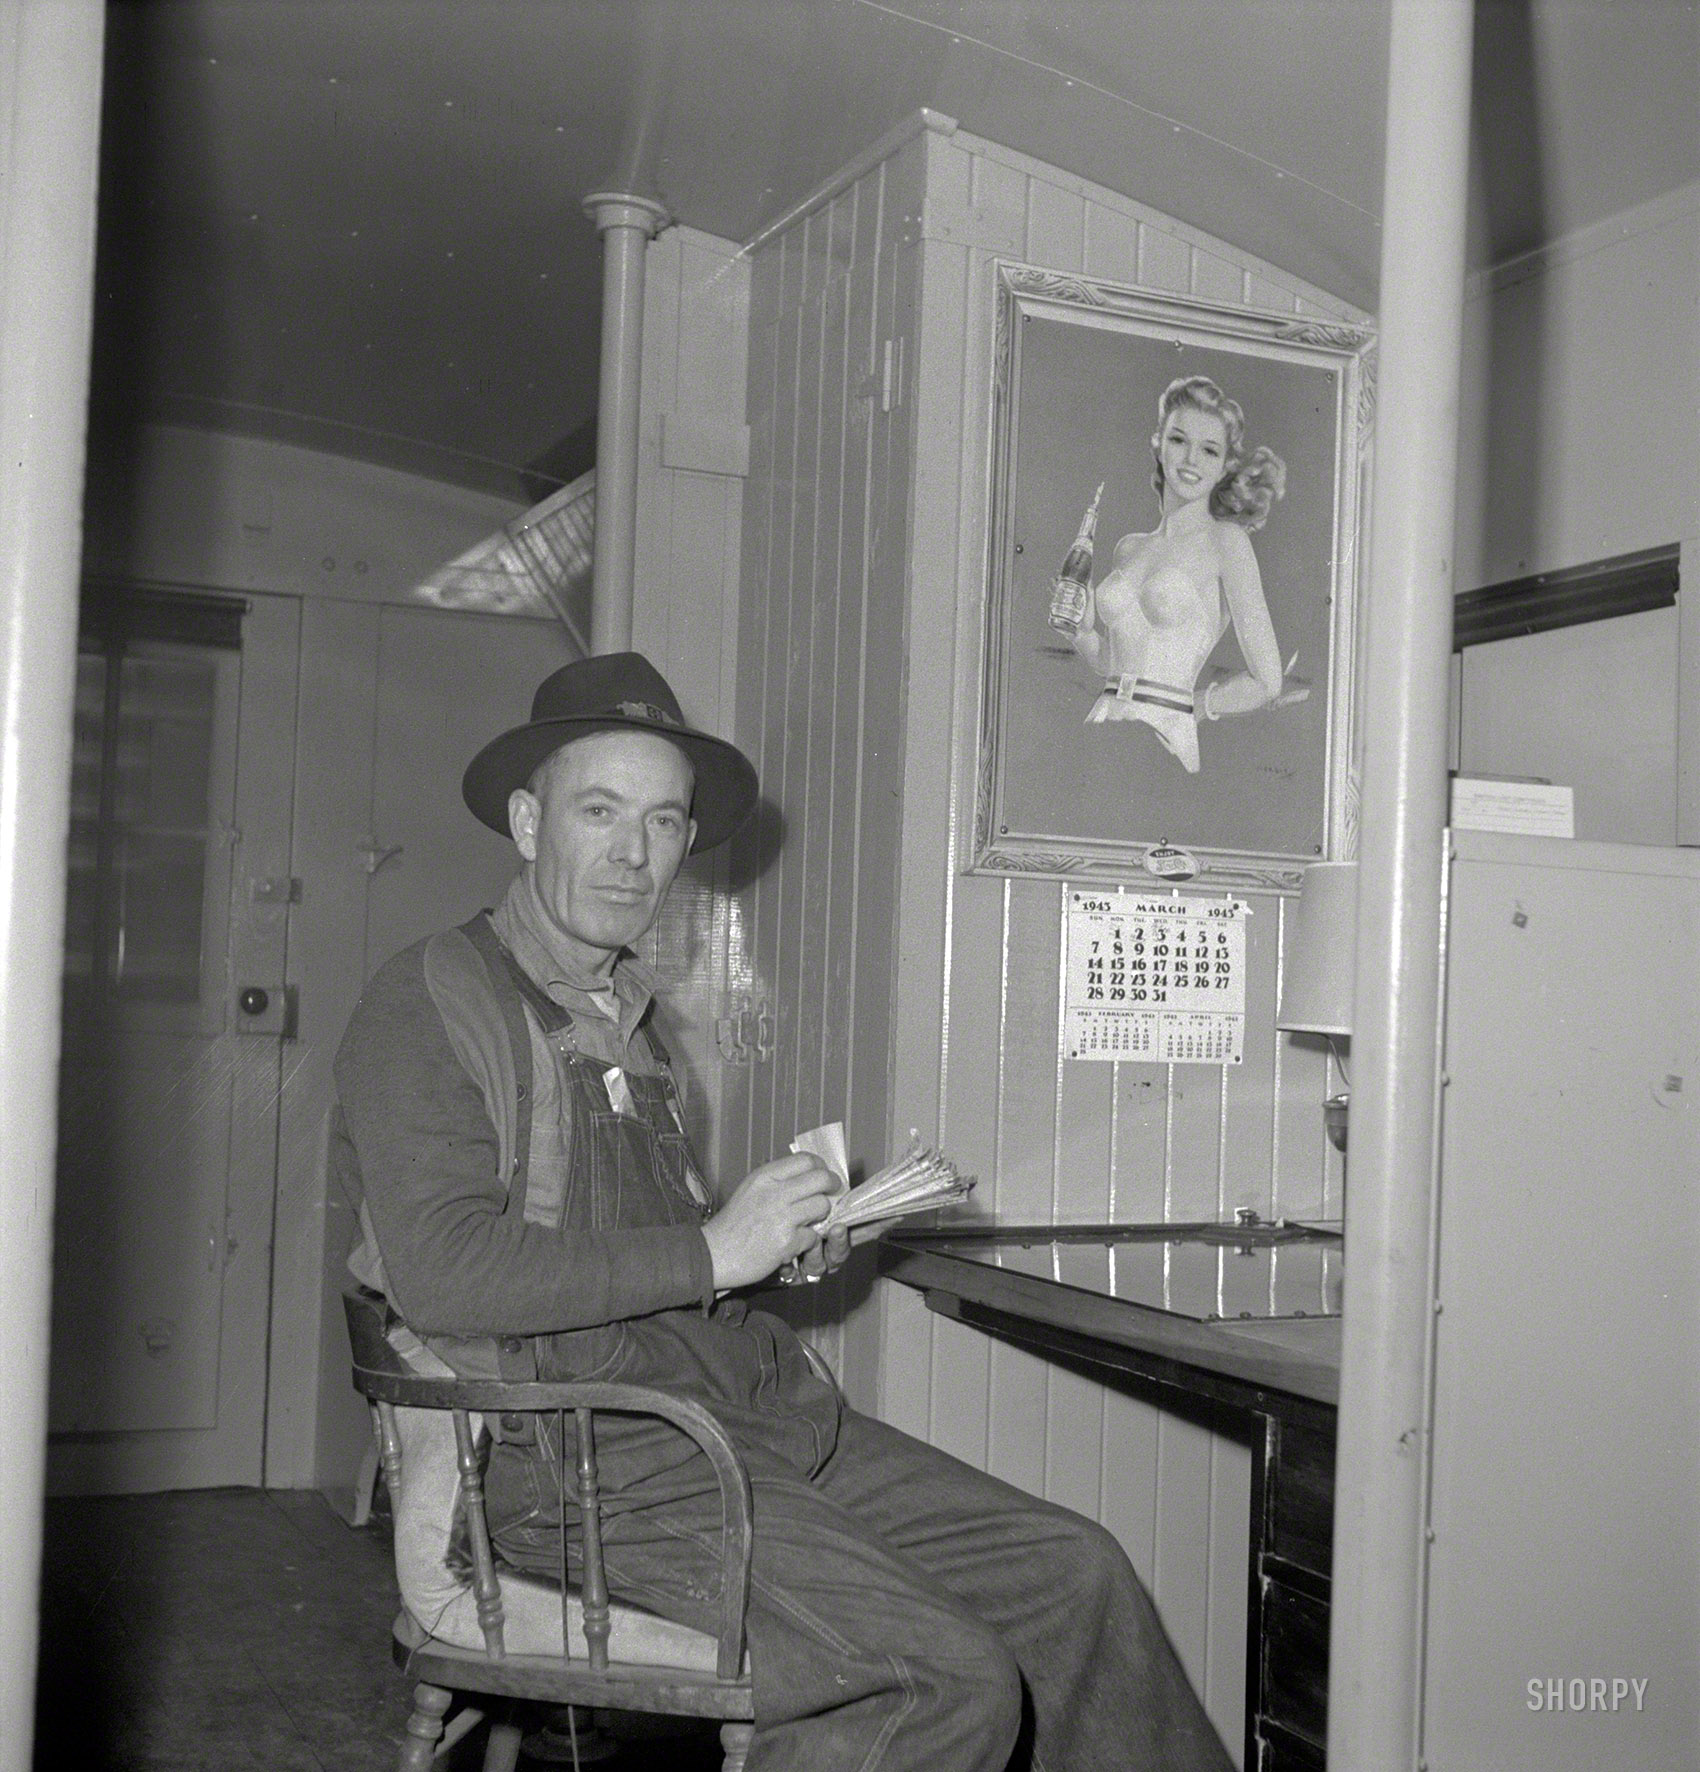 March 1943. "Conductor G. Reynolds, checking his waybills in a caboose of the Atchison, Topeka & Santa Fe Railroad between Argentine and Emporia, Kansas." Photo by Jack Delano for the Office of War Information. View full size.